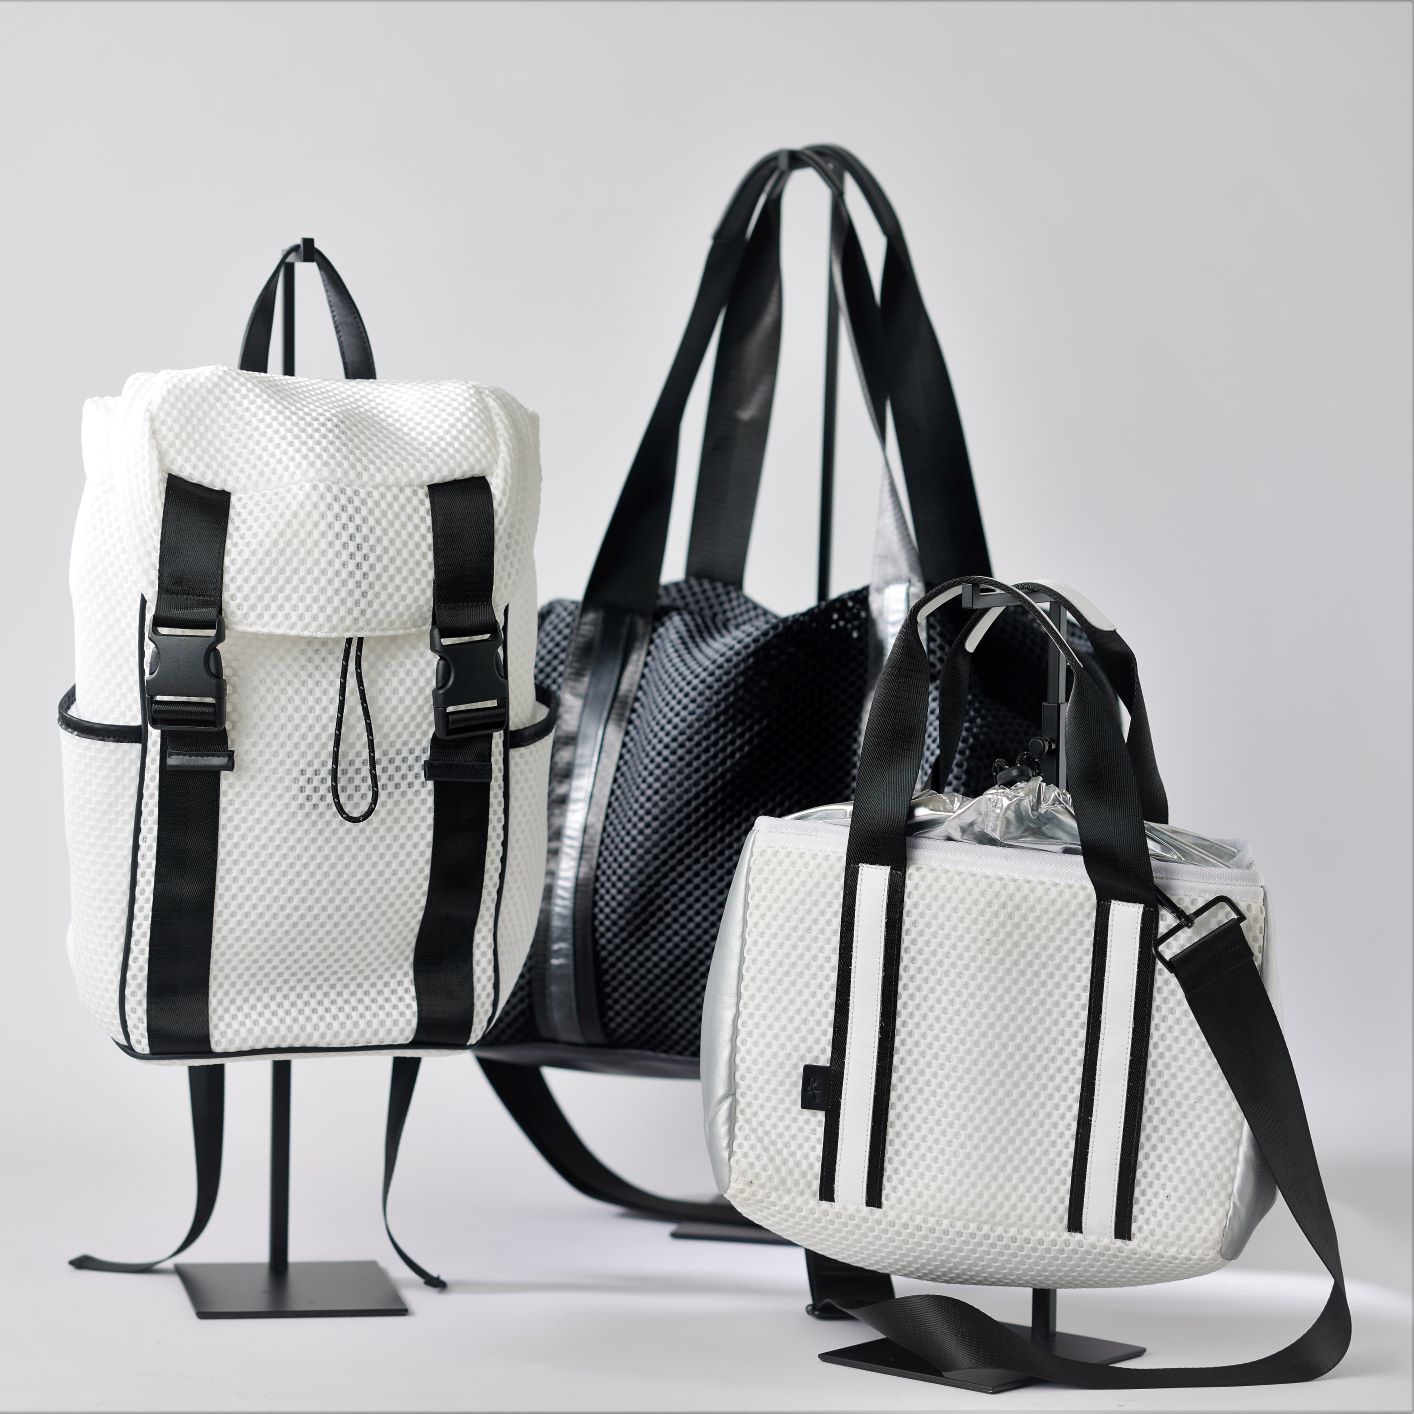 Collection of 3 Mesh Luxe Sport Bags: white newberry backpack, black stanton duffel and white midway small crossbody